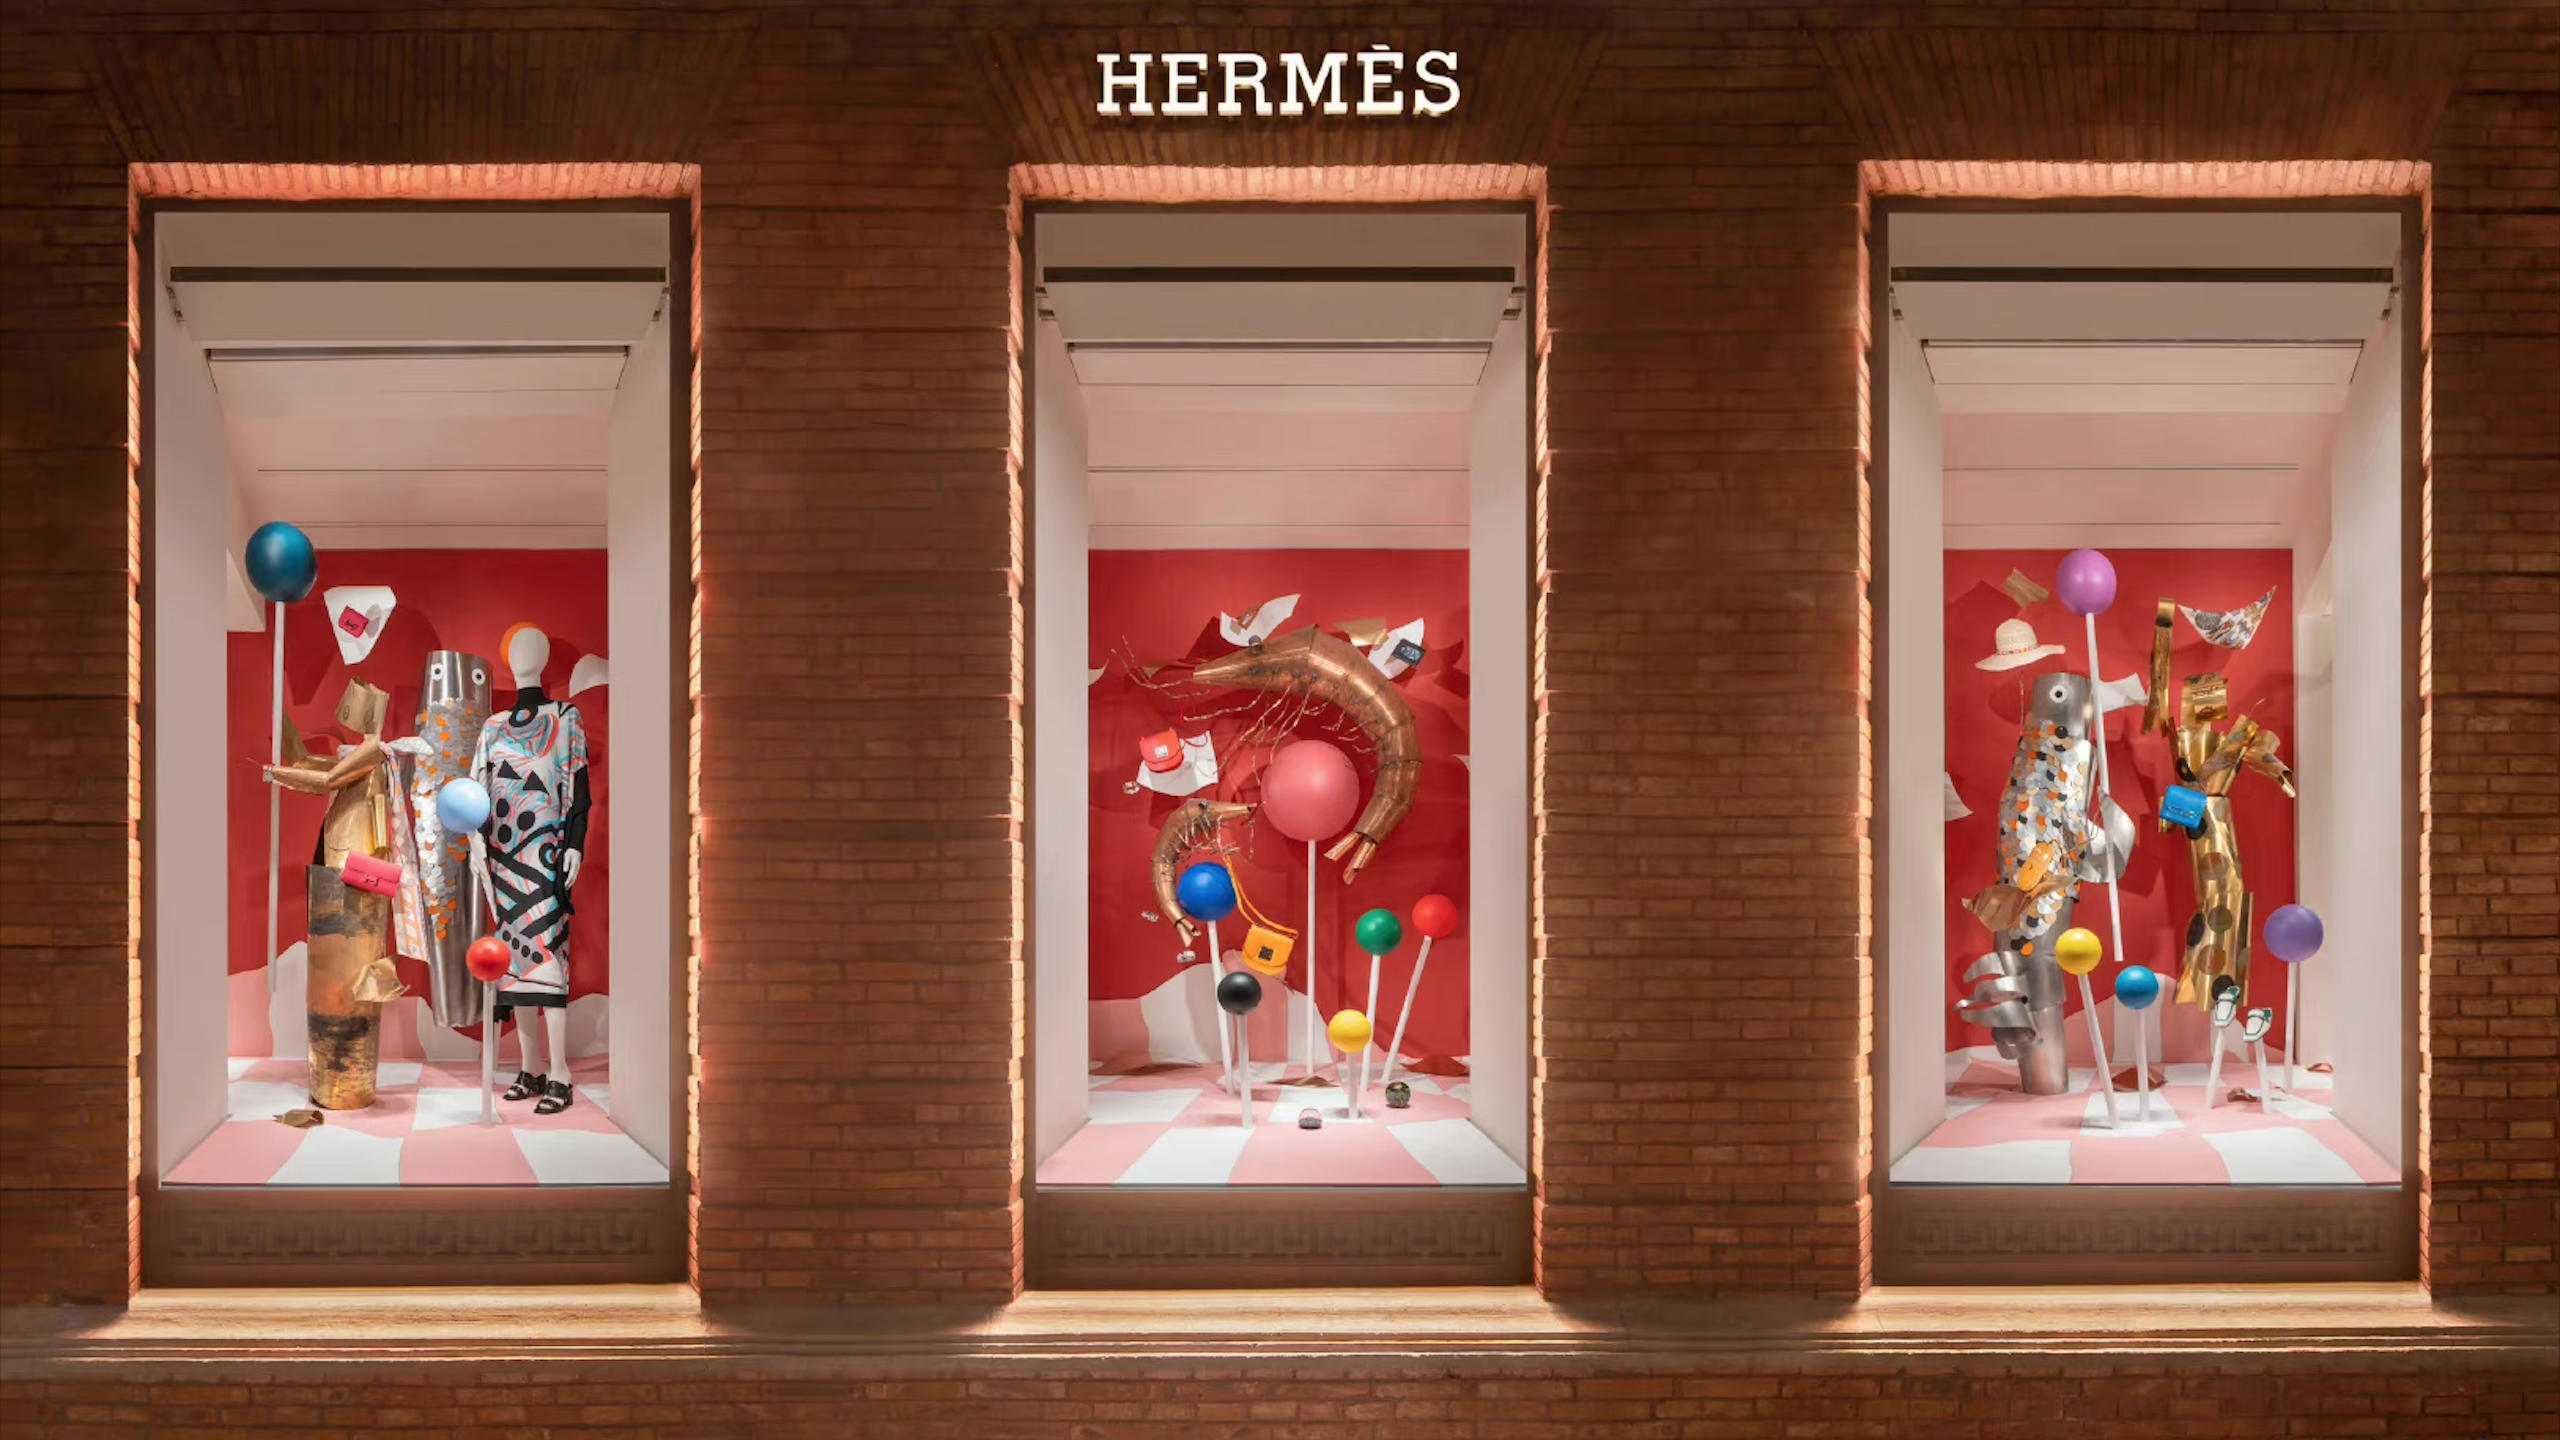 Luxury houses are building independent flagship stores in China’s top-tier cities. Can branded experiential retail help them stand out in this saturated market? Image: Hermès